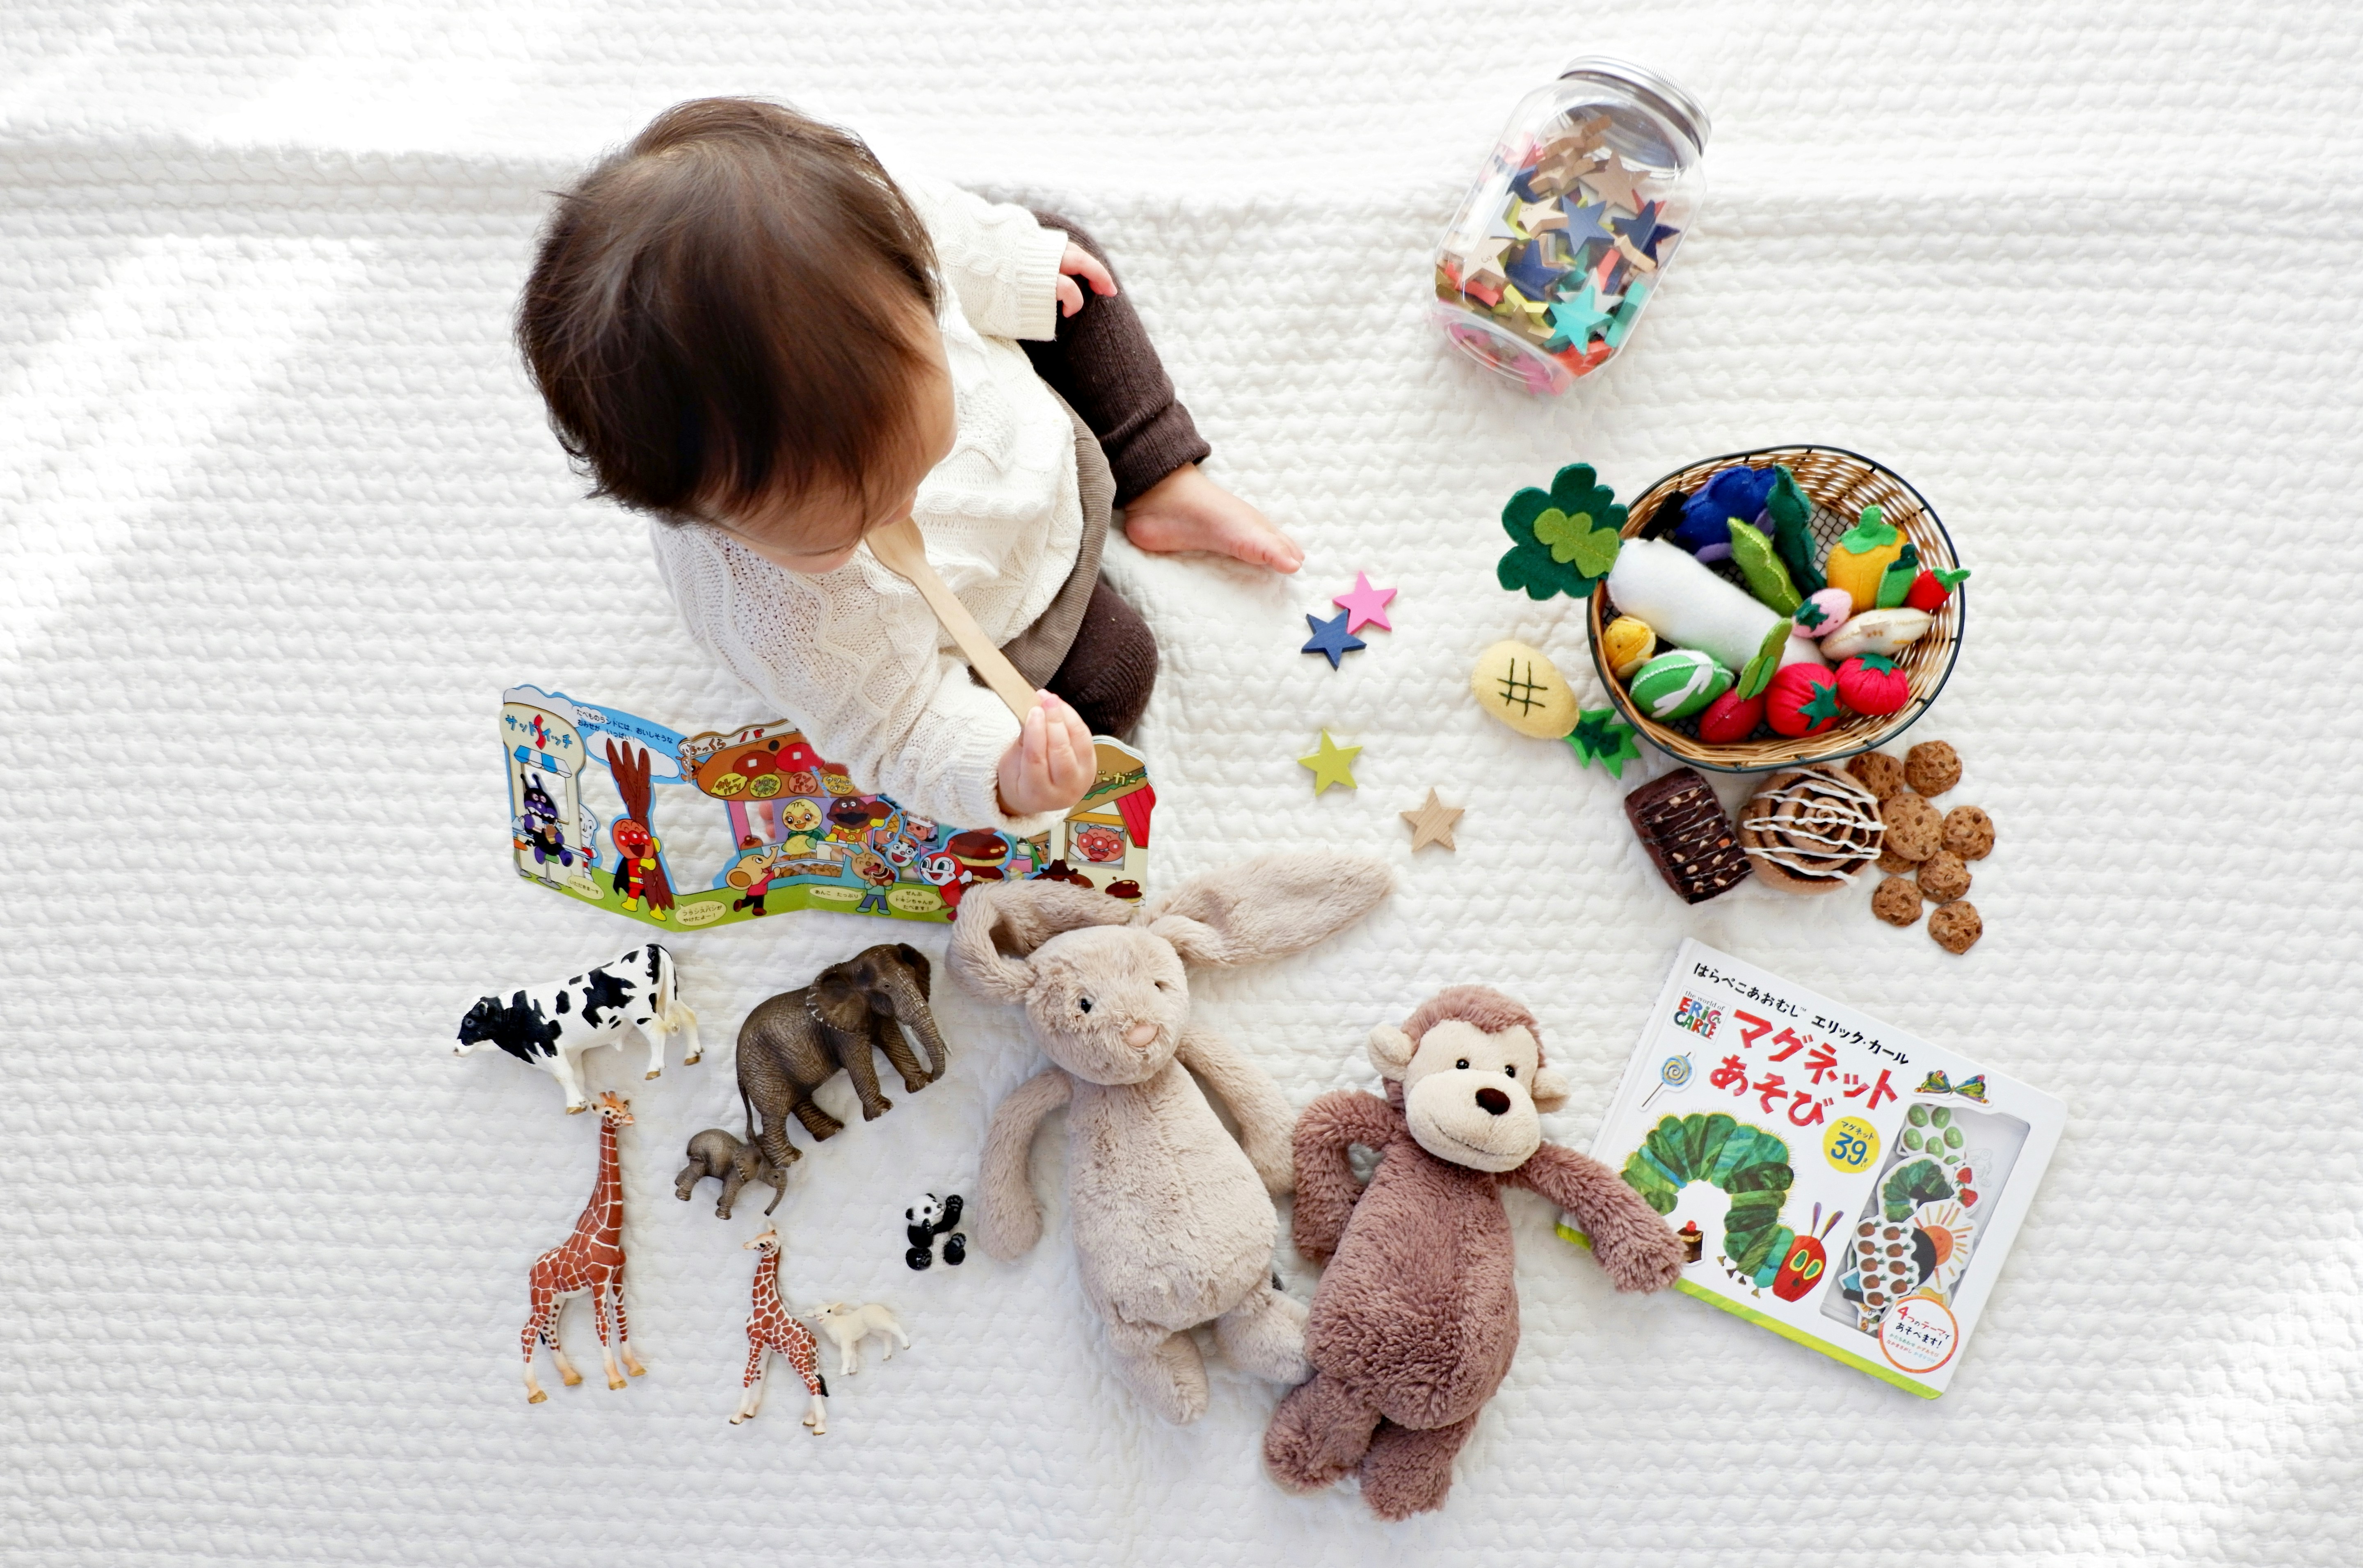 Image taken from above of young child on a white carpet surrounding by toys